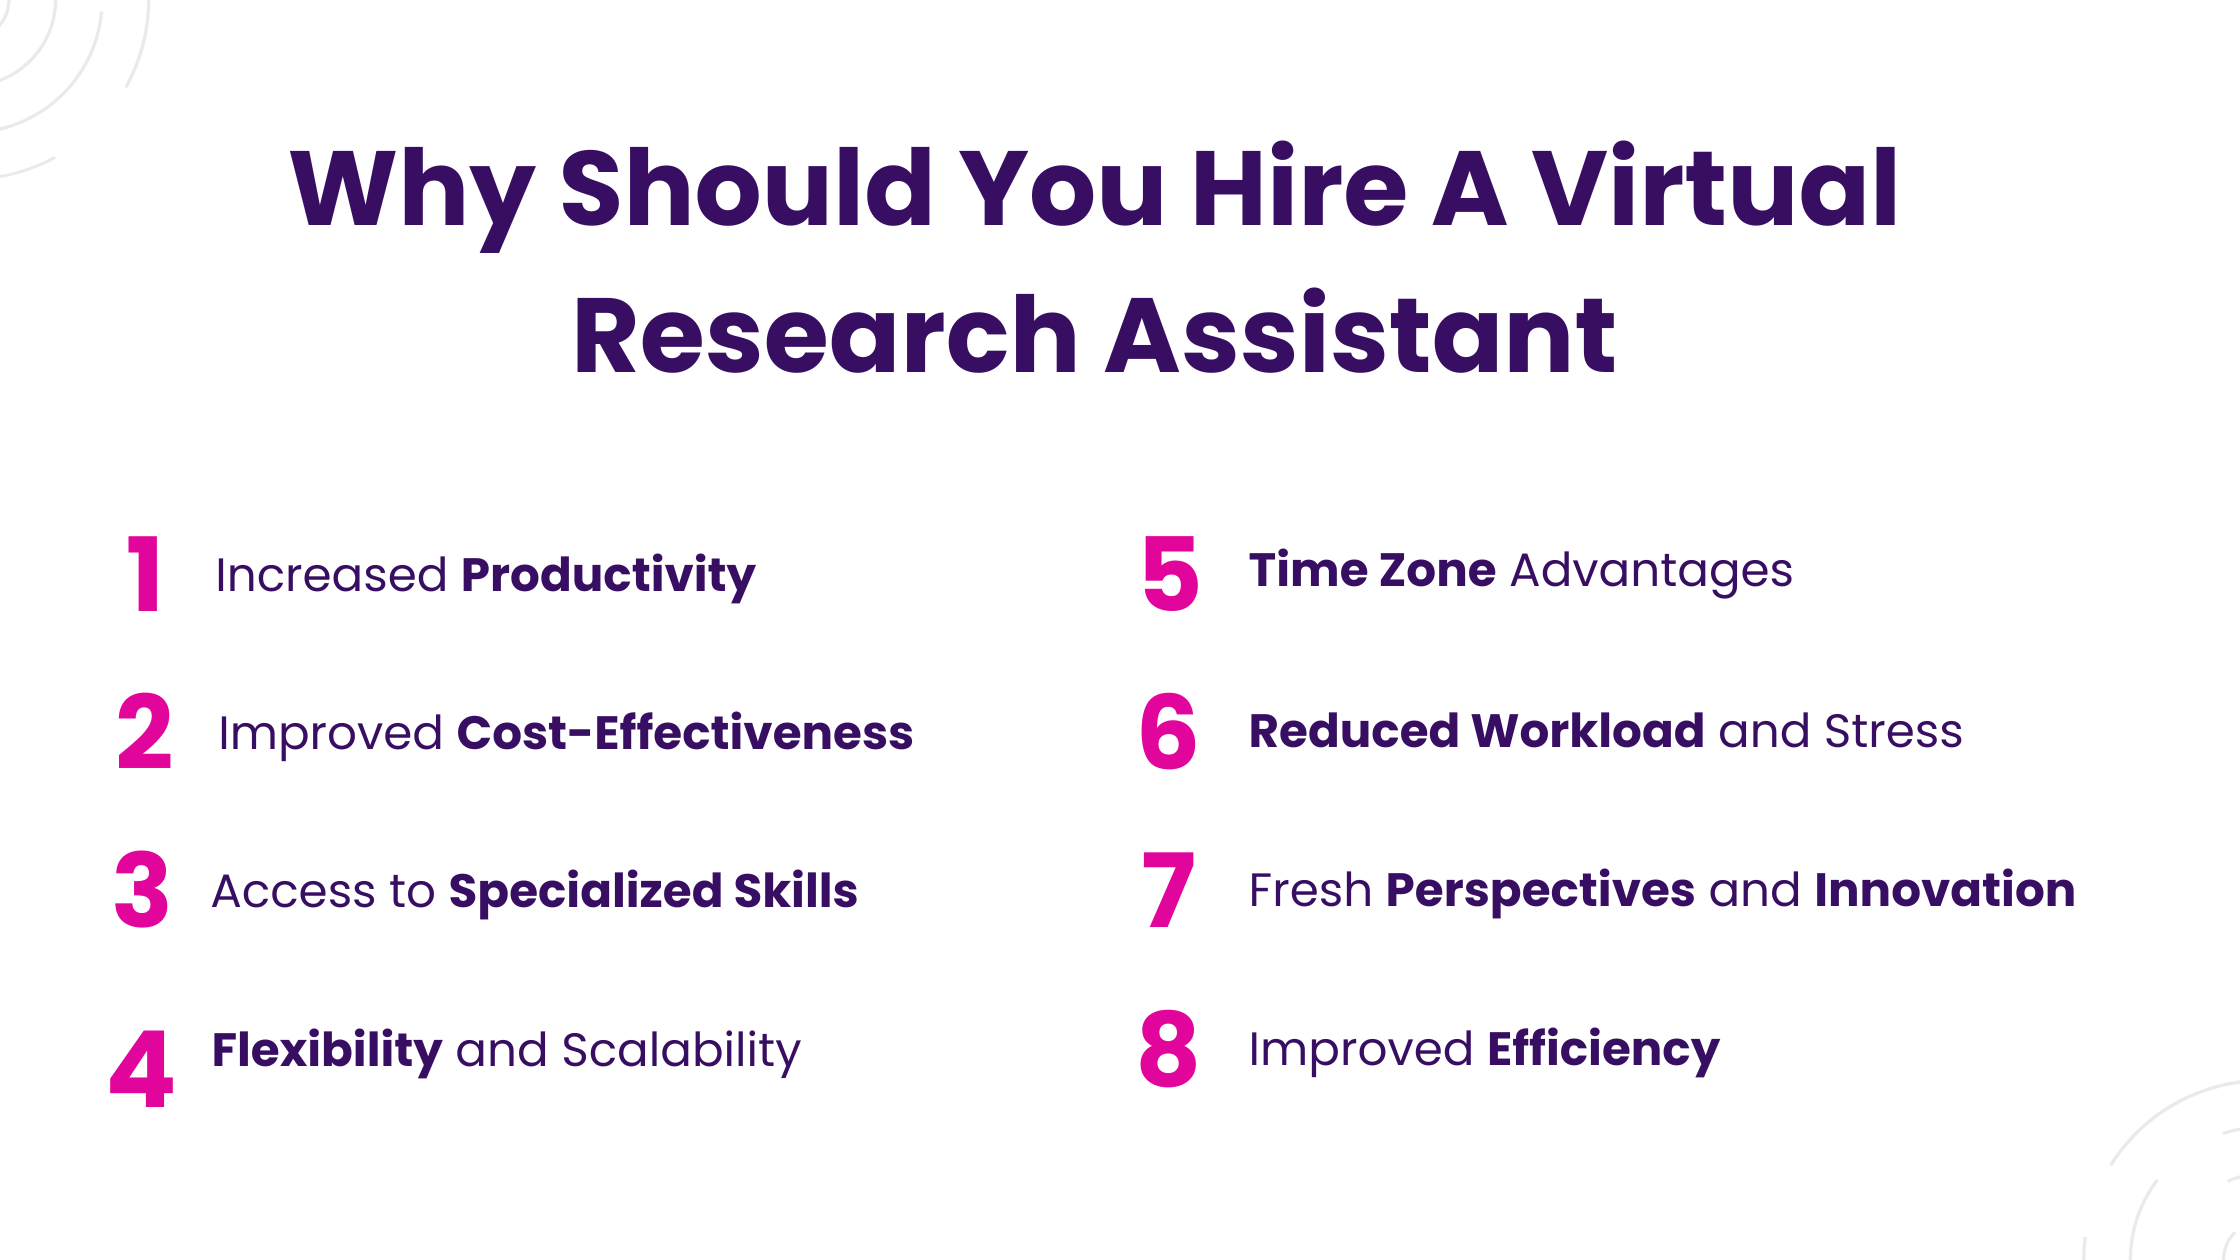 Why Should You Hire A Virtual Research Assistant